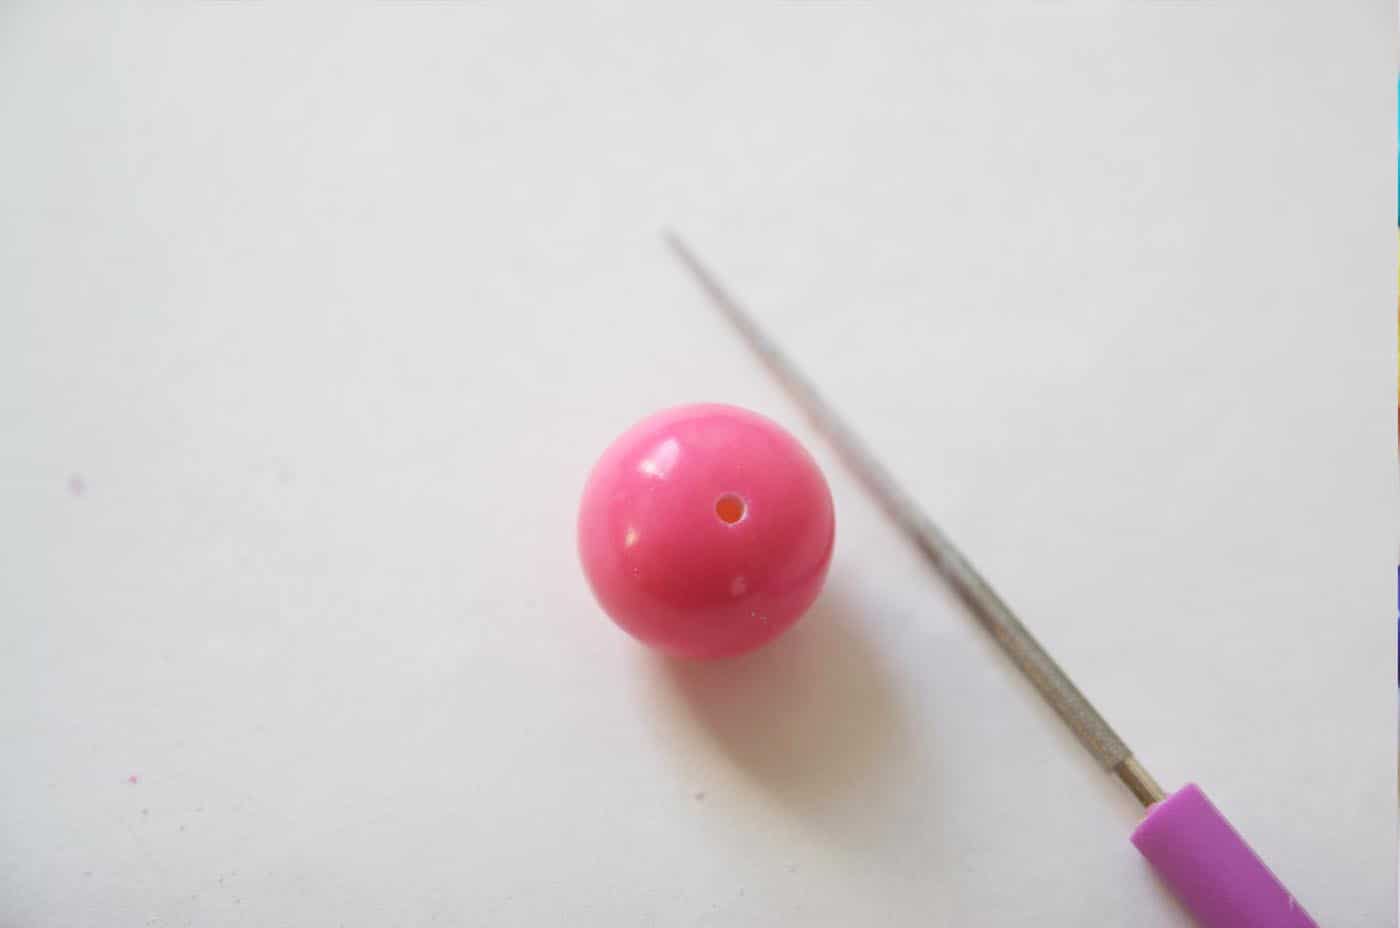 Gumball pierced with an awl